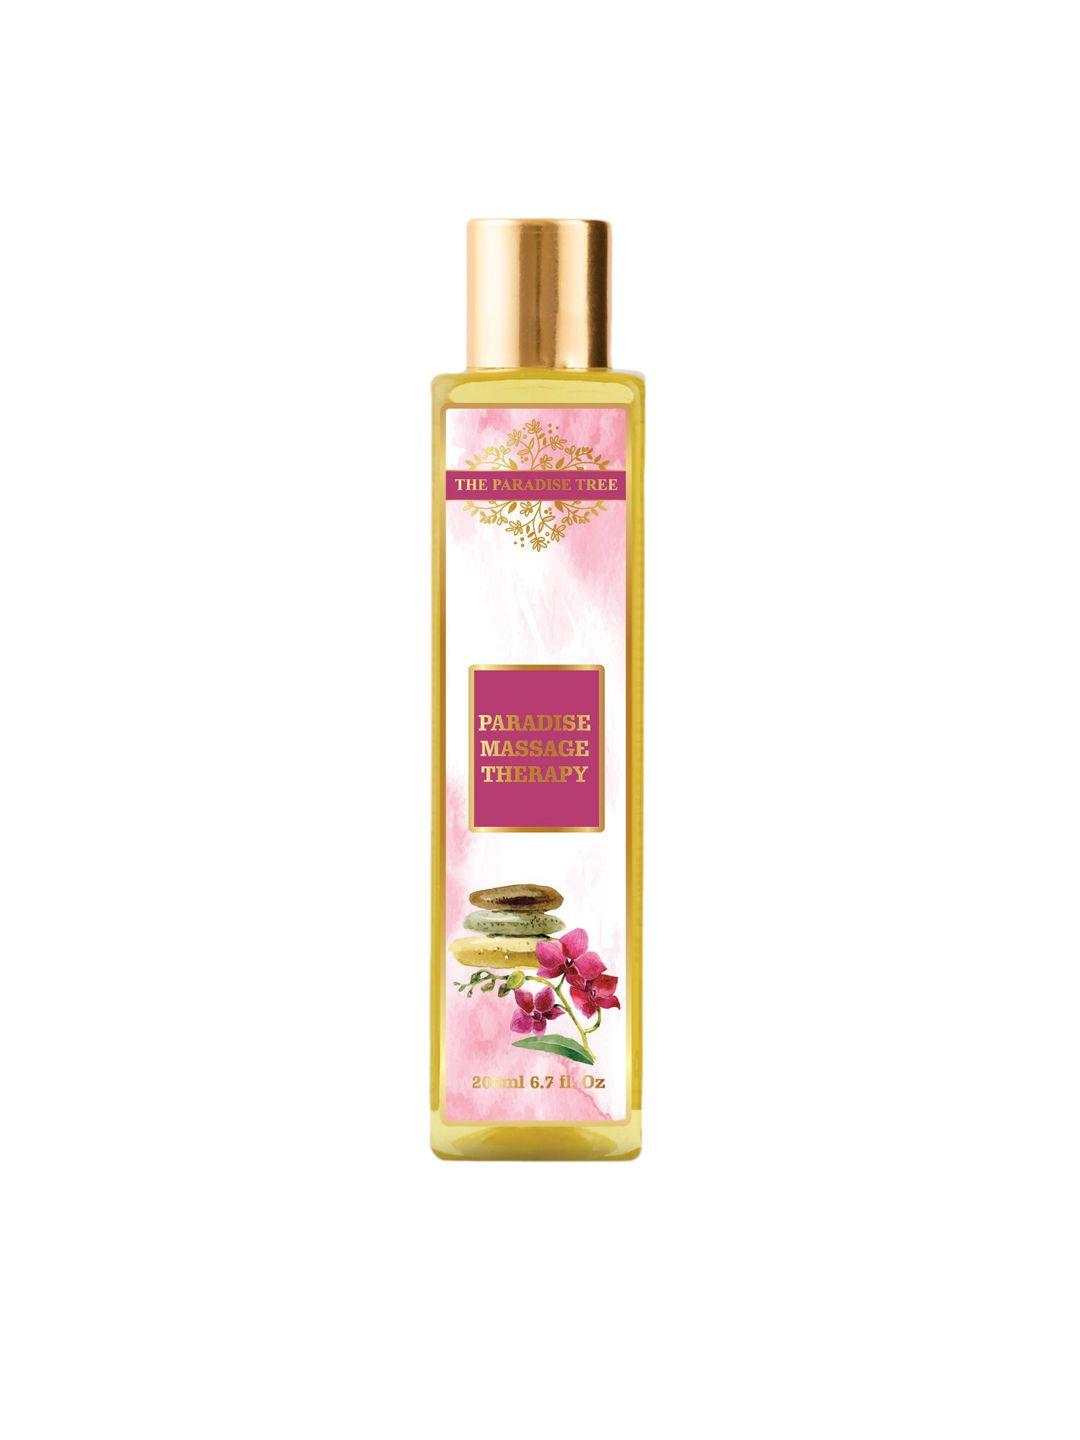 the paradise tree's massage therapy oil